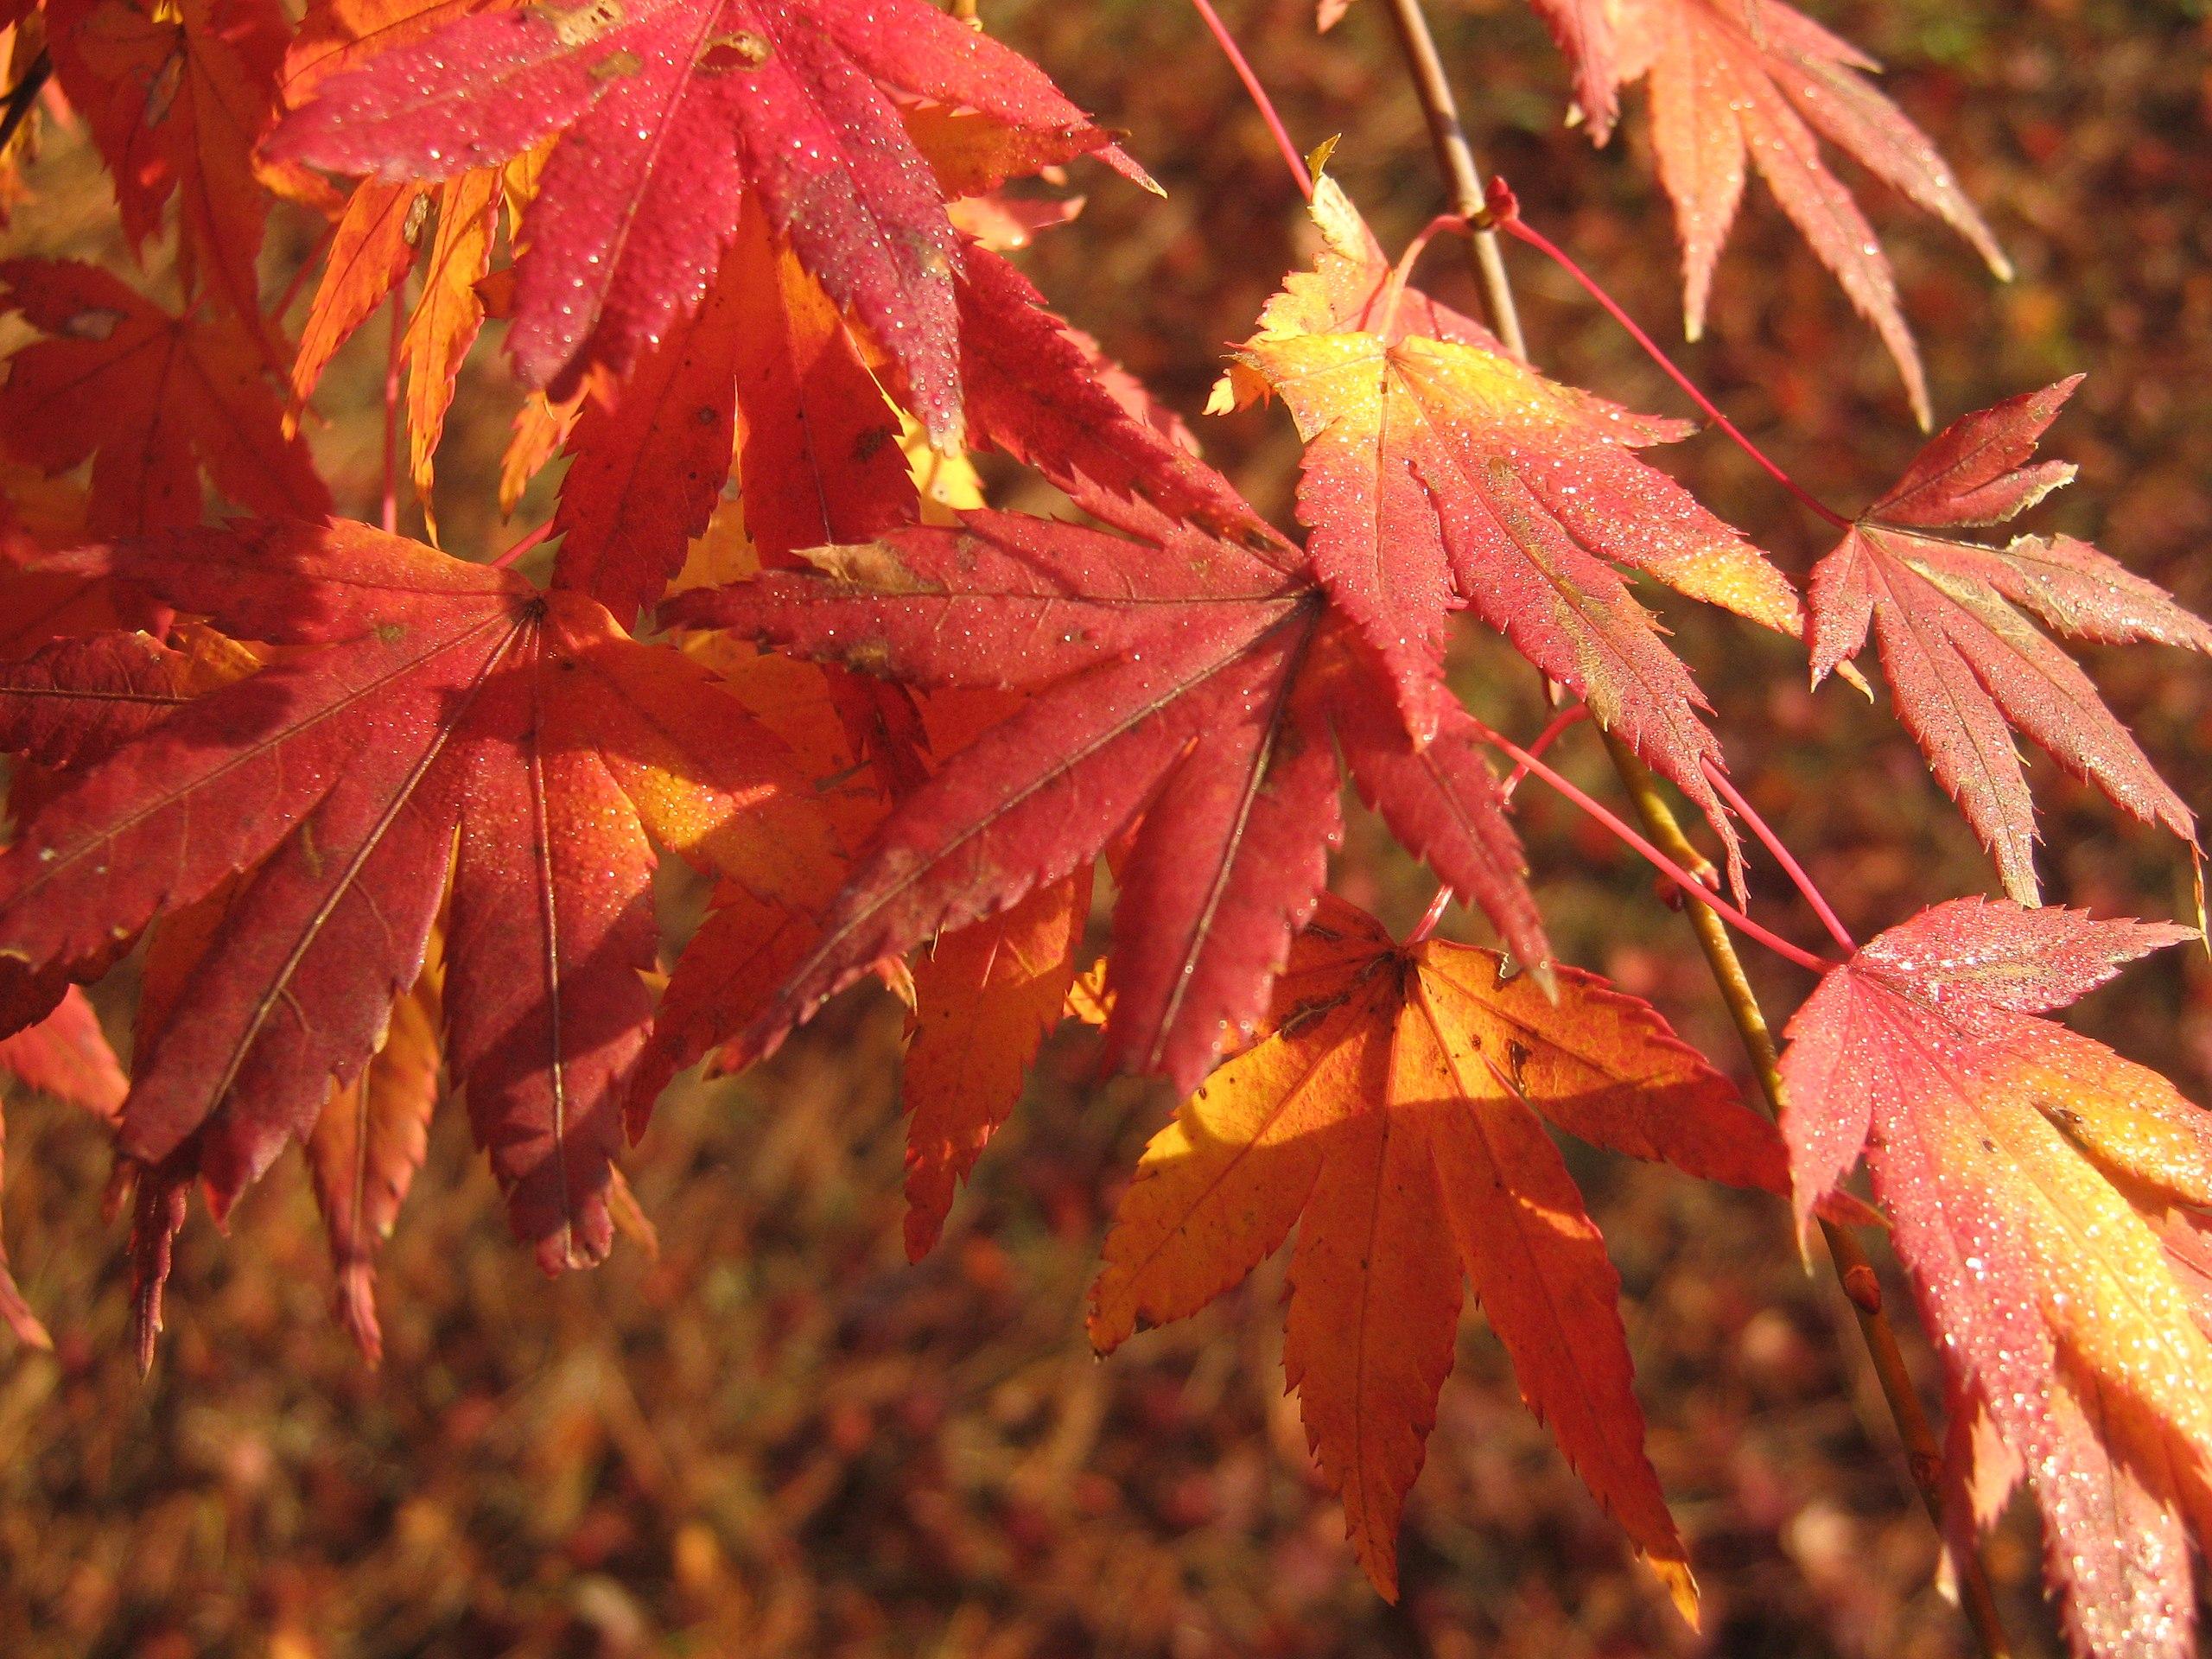 red-orange leaves with pink petioles and beige stems